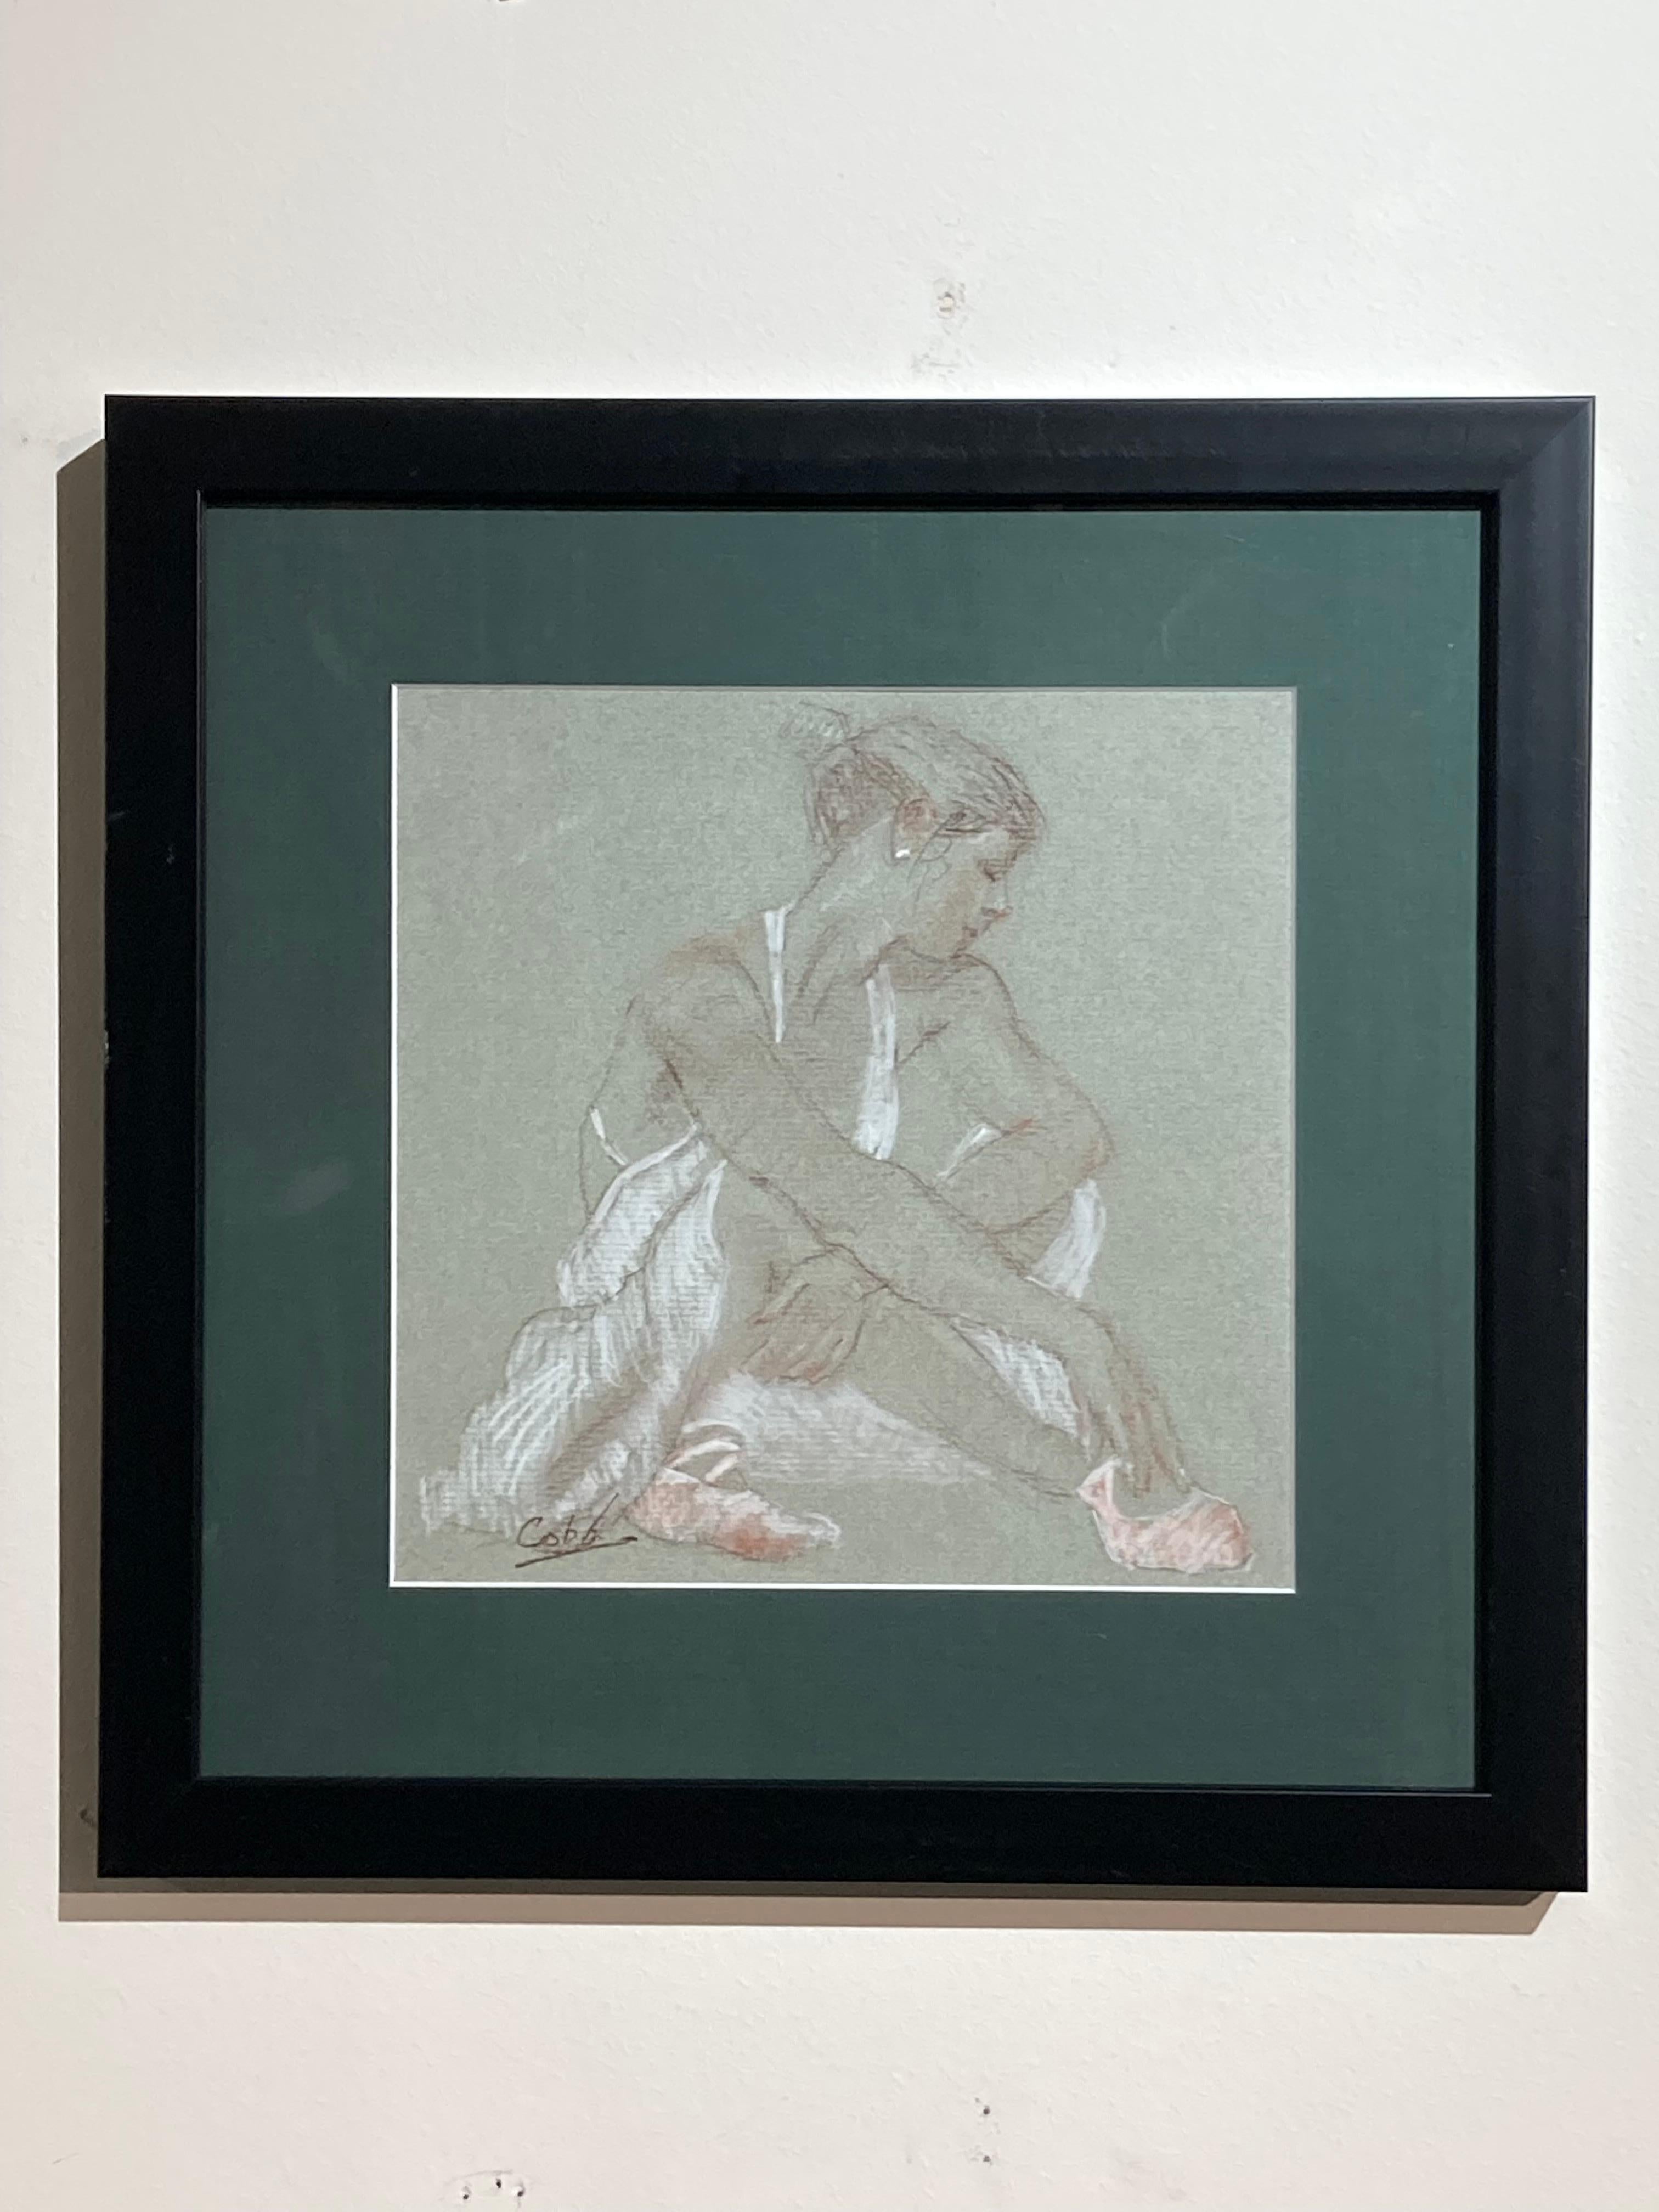 Ballerina in Repose #2, de James Cobb, Charcoal and Conte Drawing, 2021